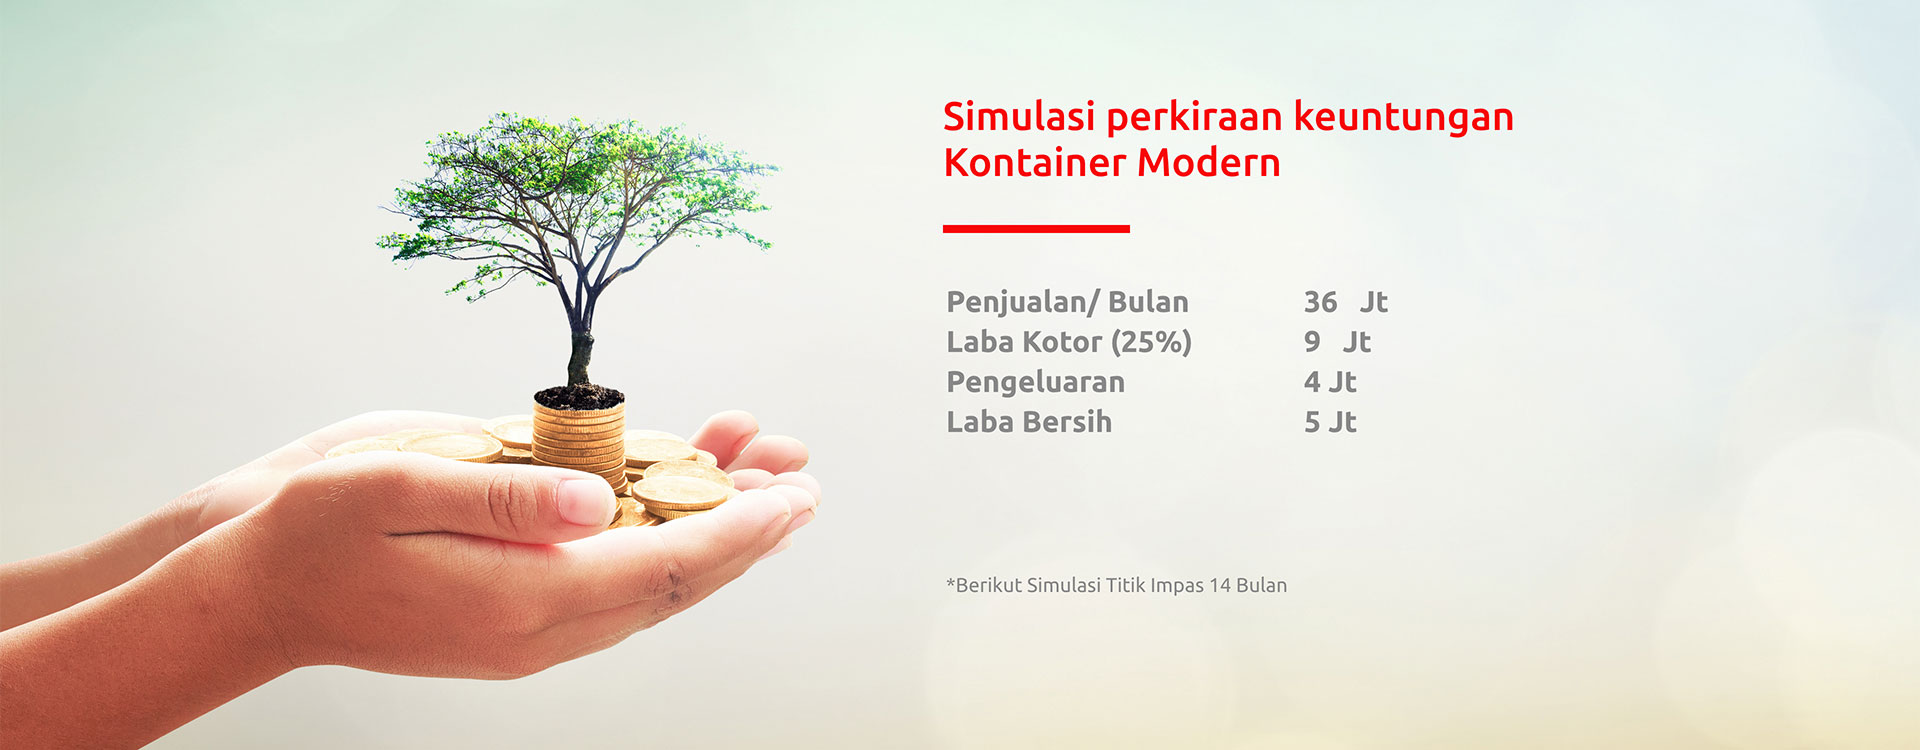 https://lottemart.co.id/Page Banner Simulasi Kontainer